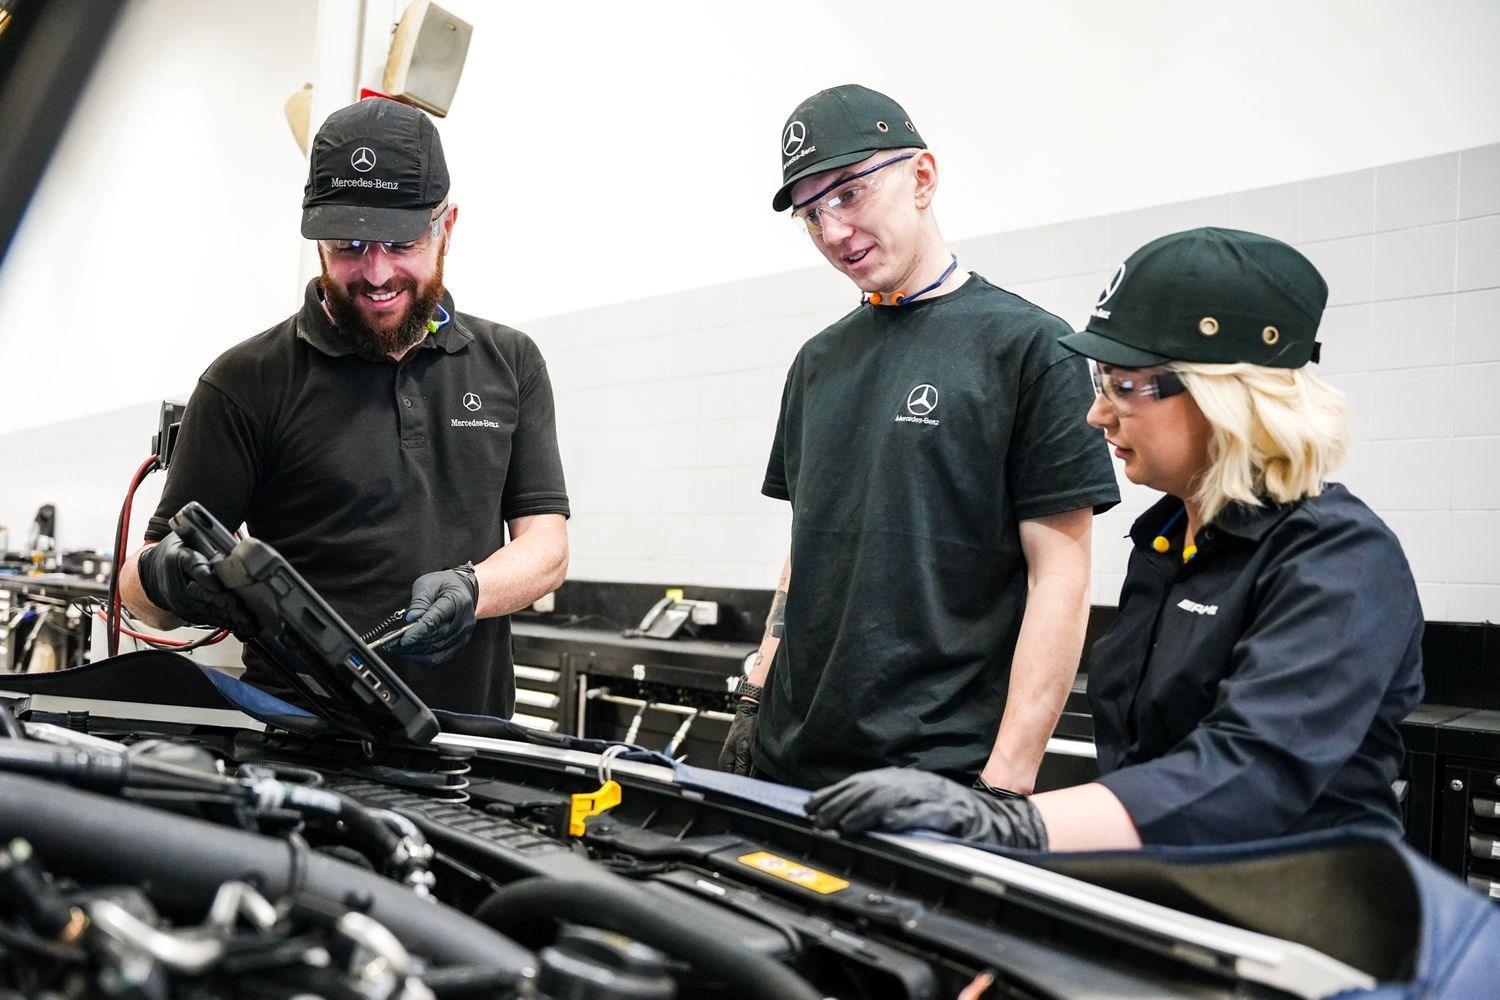 Three Mercedes-Benz technicians discuss the electrical issues of a Mercedes-Benz vehicle on tablet during MOT inspection